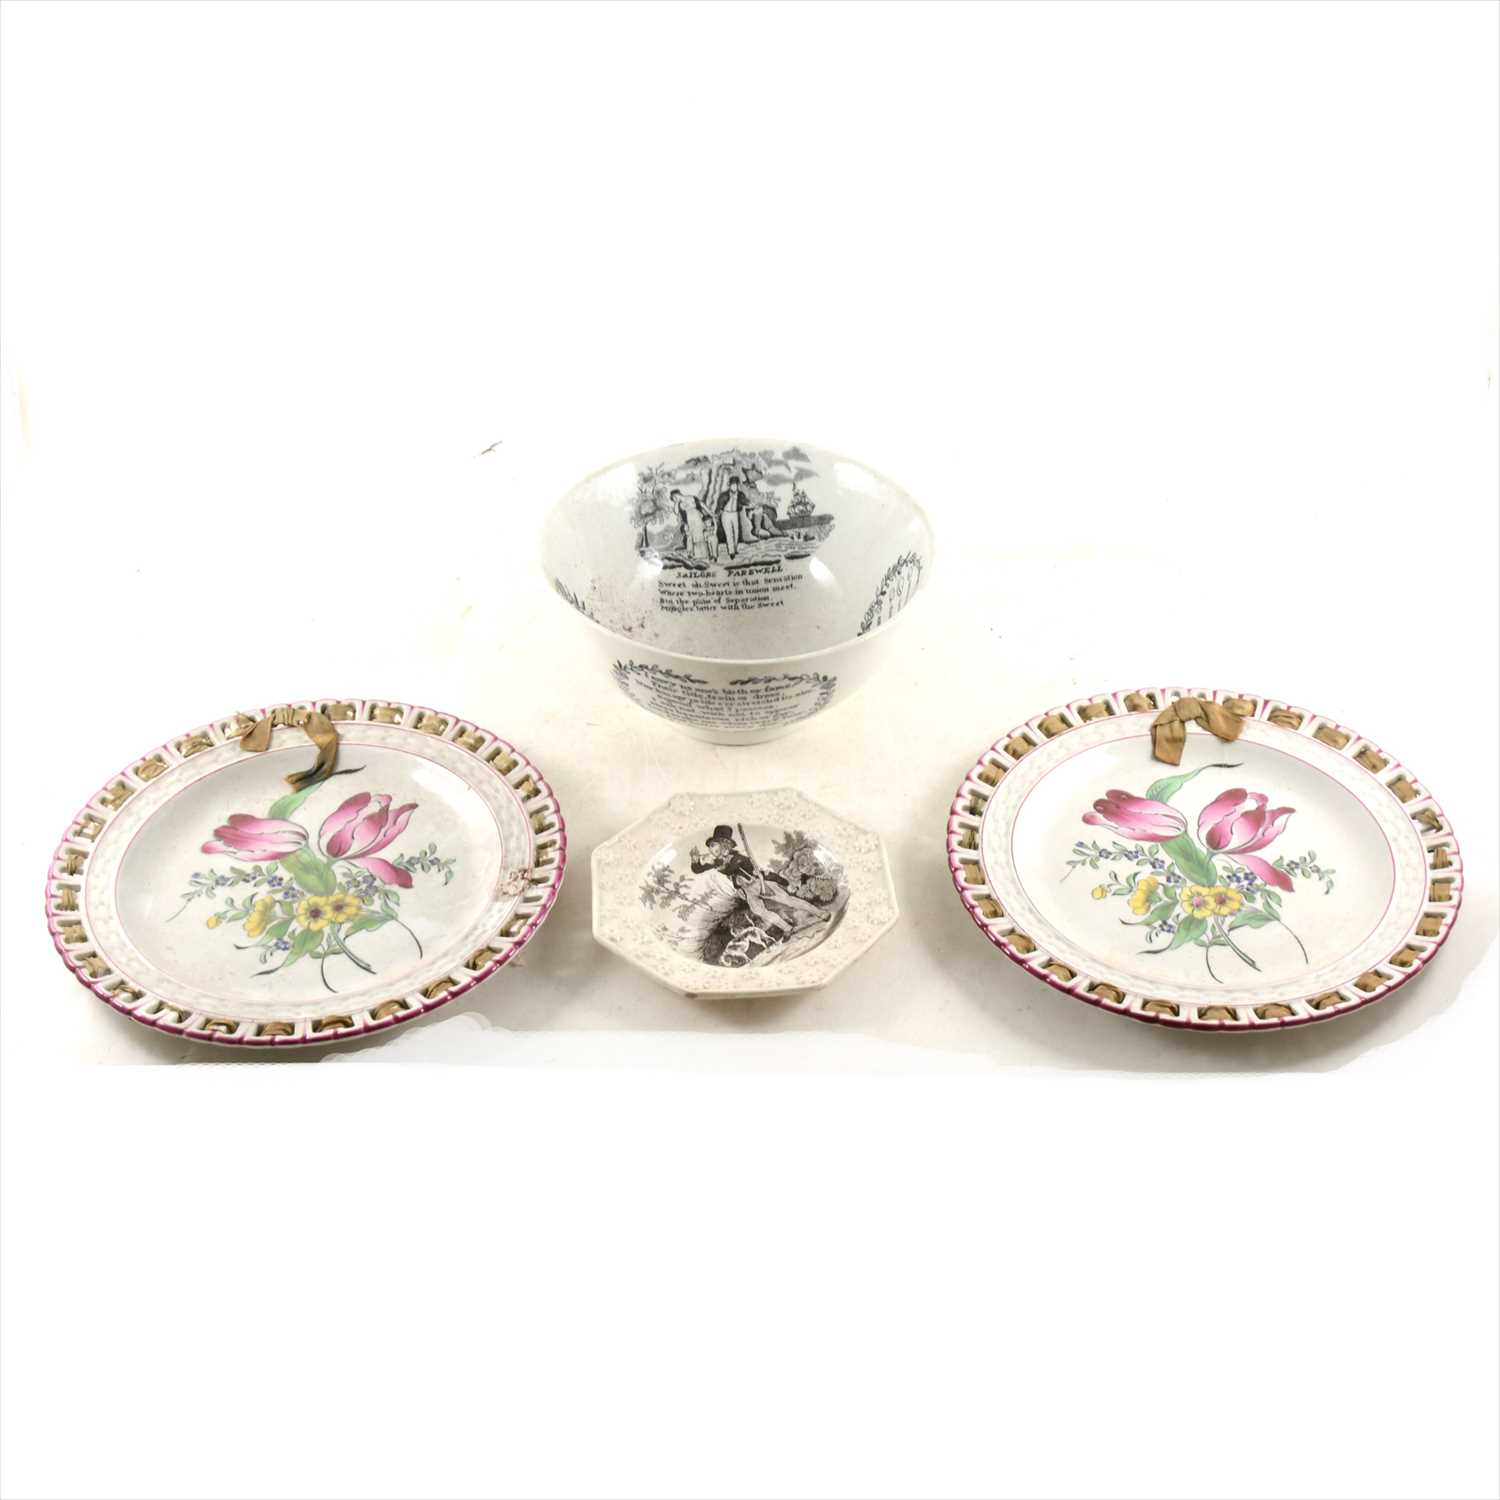 Lot 19 - A Staffordshire octagonal nursery plate, Sailor's Farewell basin, and two plates